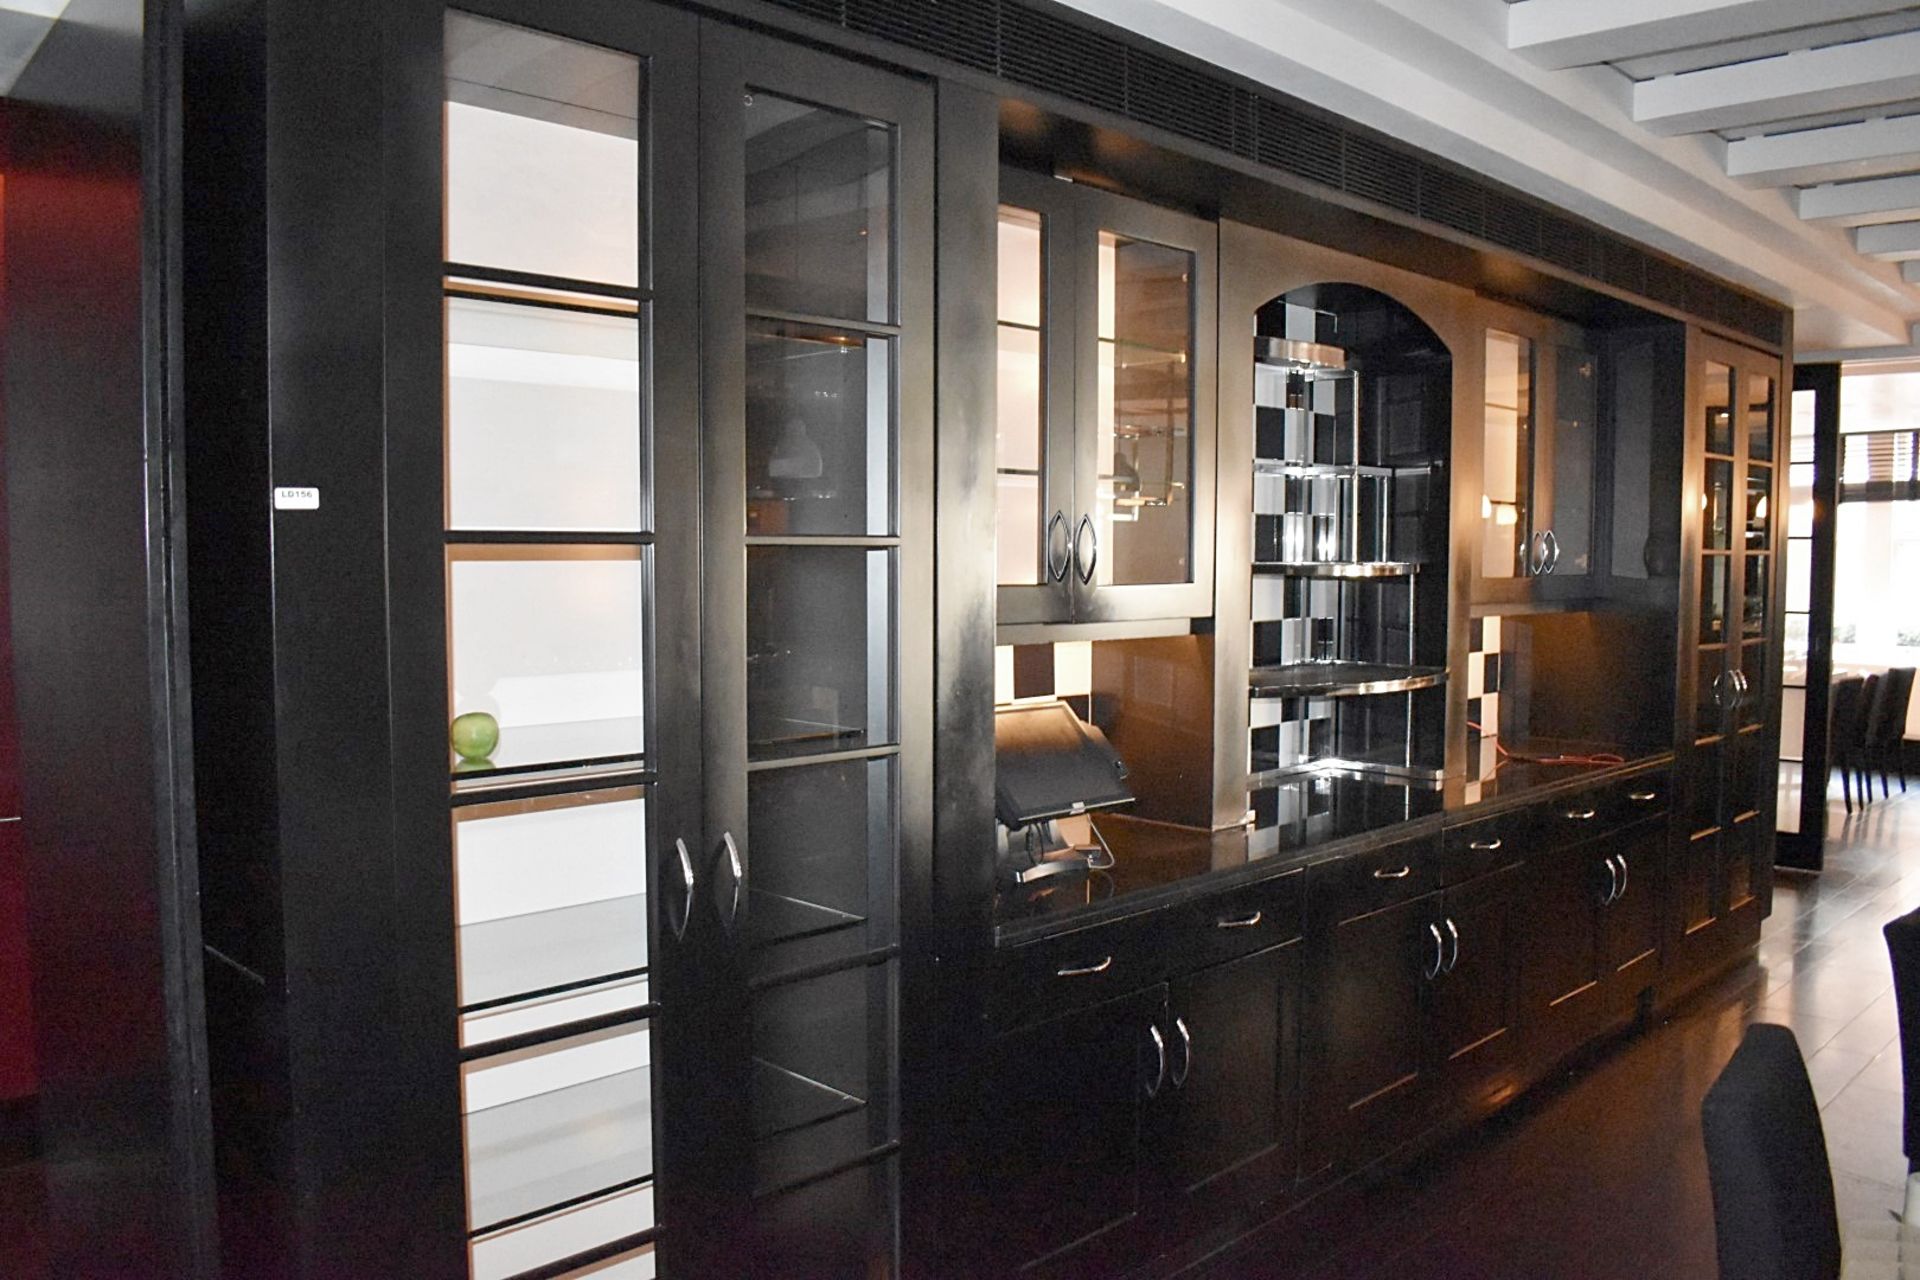 1 x Large Wall Dresser / Server Cabinet in Black - Features Epos Stations, Display Cabinets, Storage - Image 3 of 7